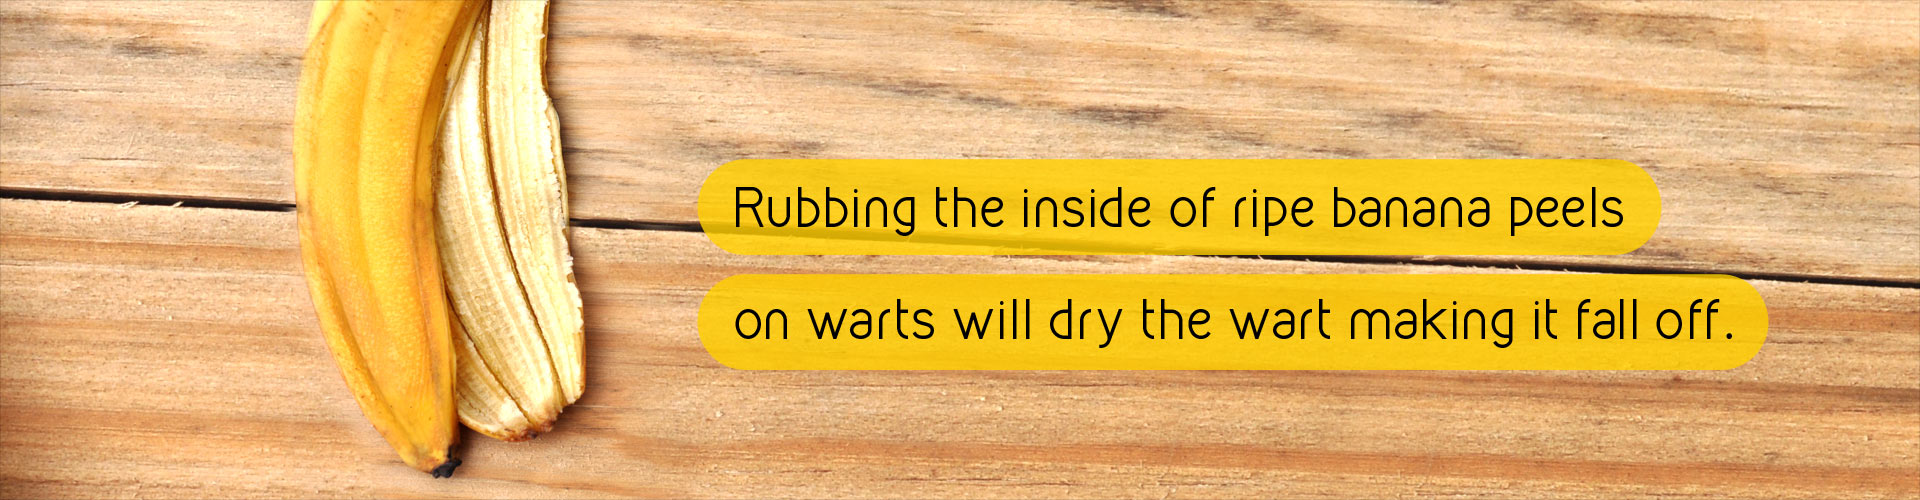 Rubbing the inside of ripe banana peels on warts will dry the wart making it fall off.